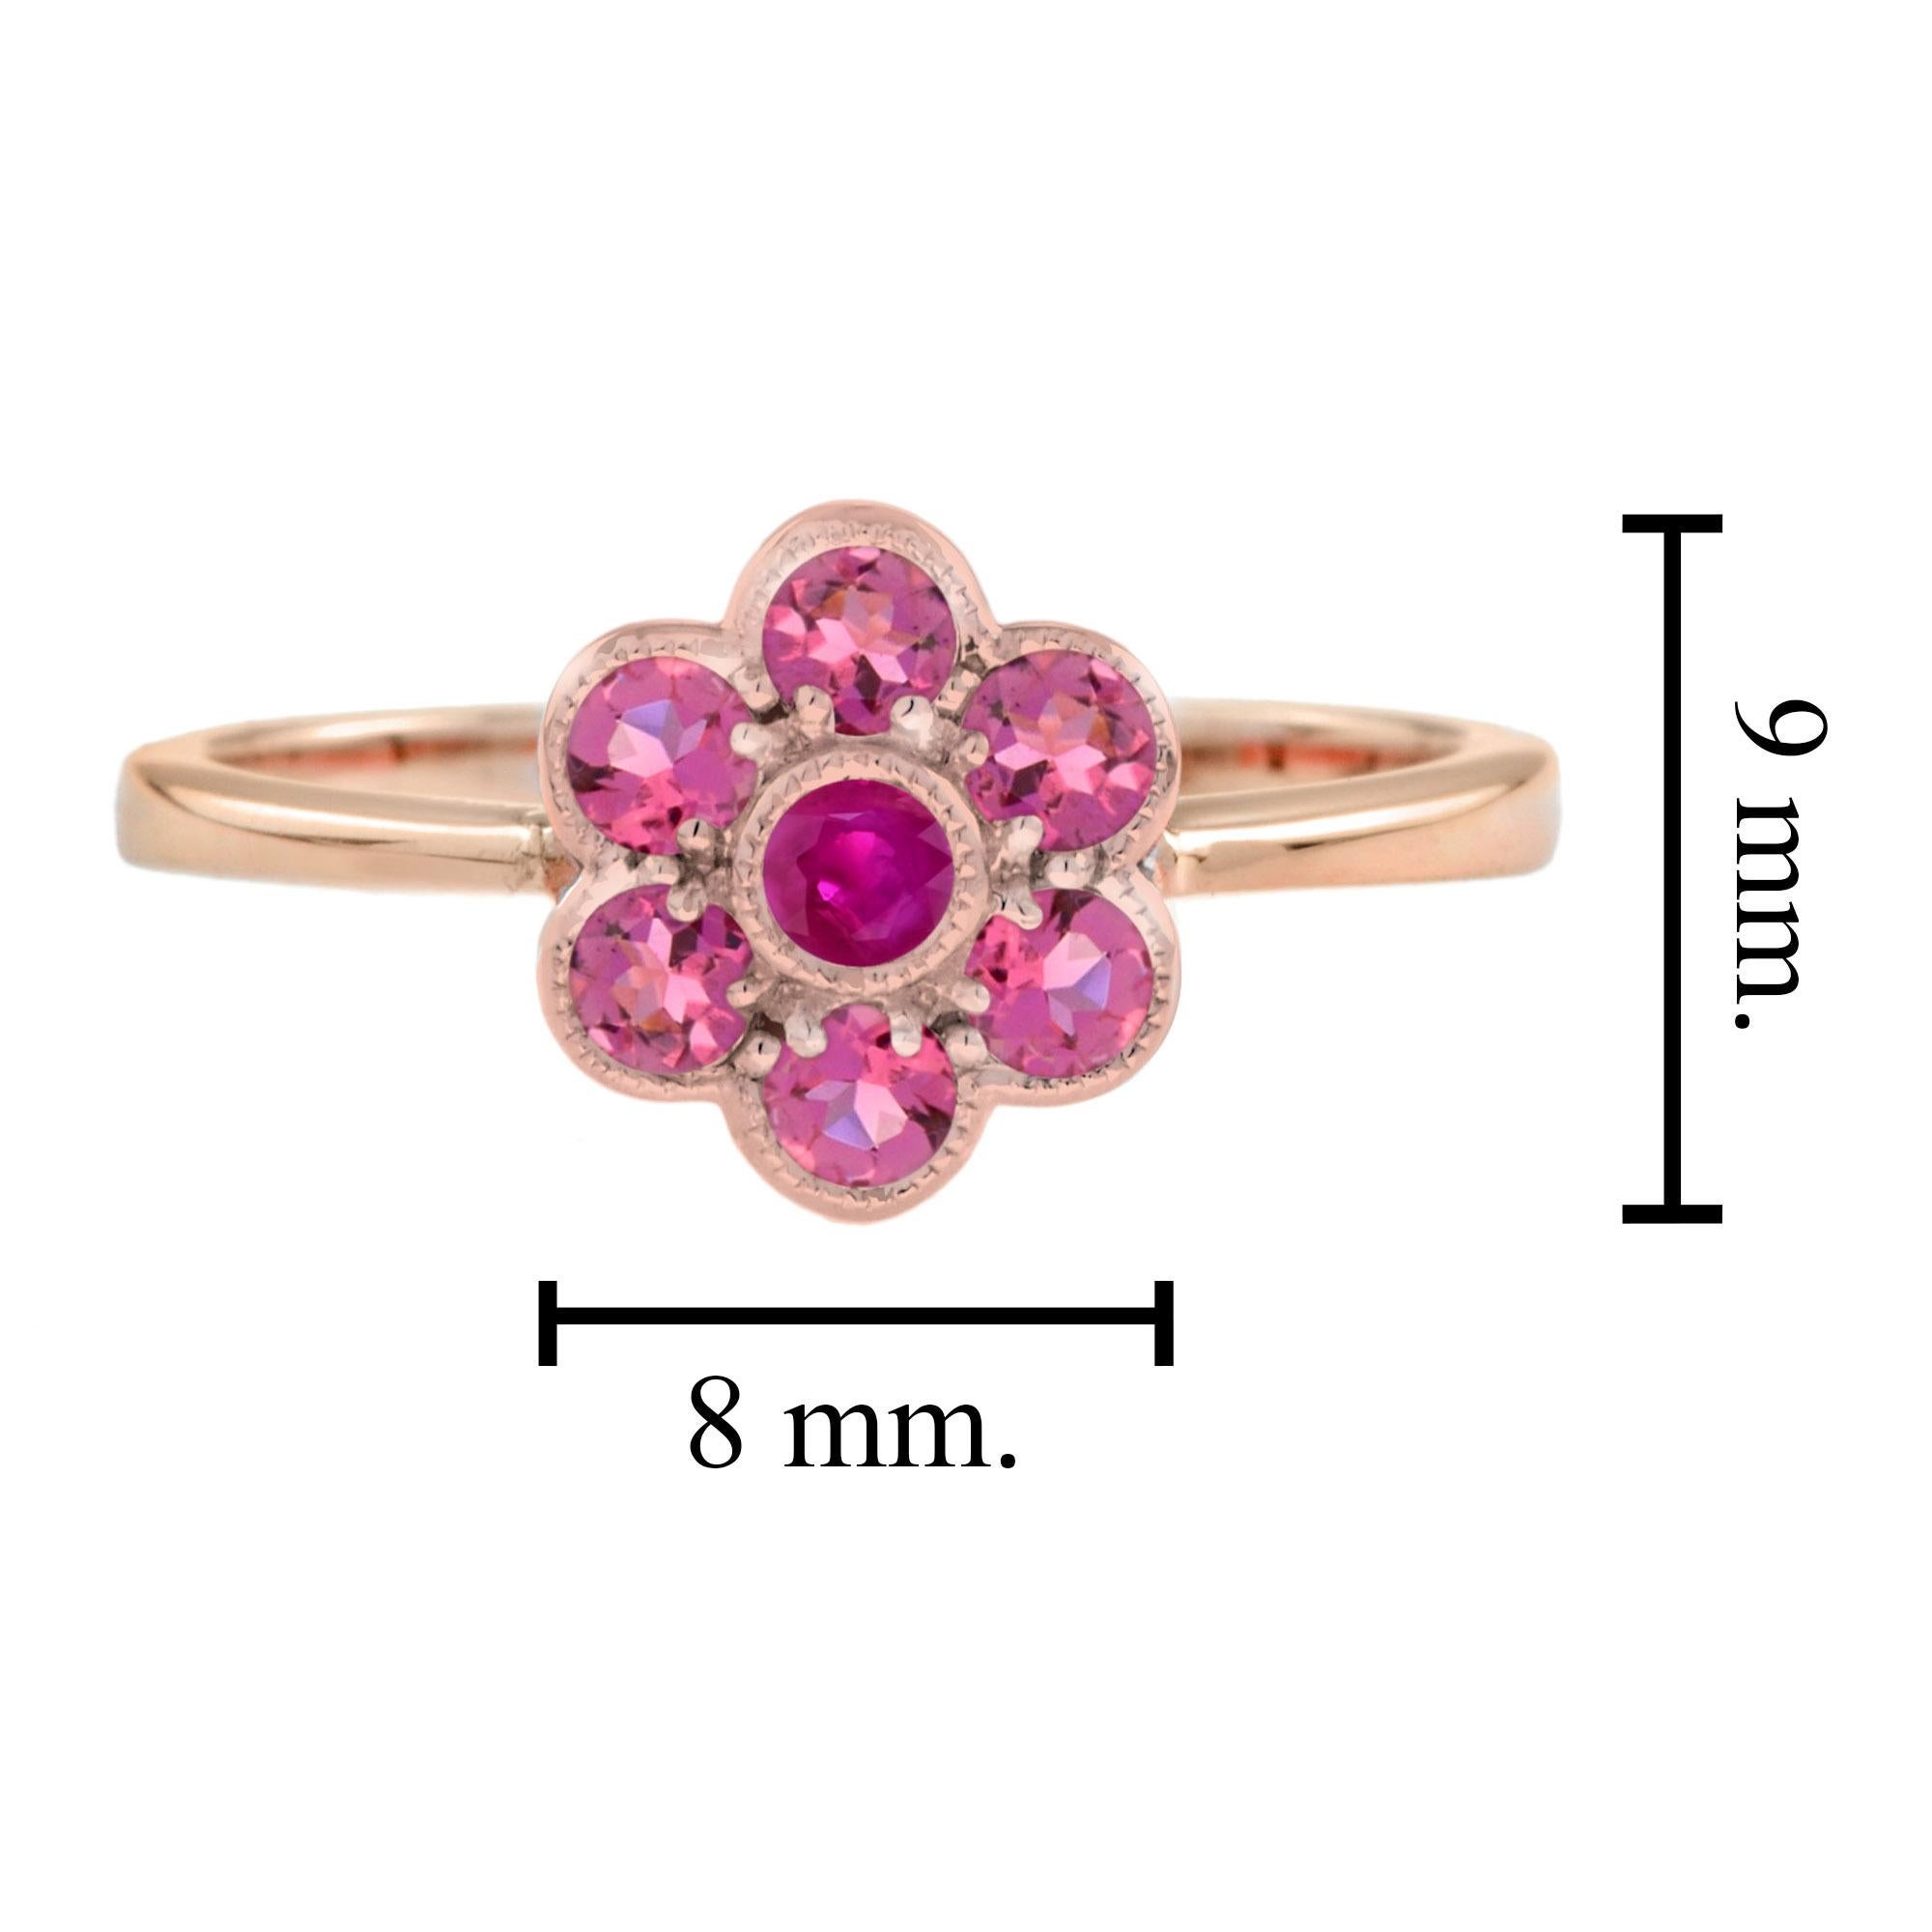 For Sale:  Ruby and Pink Tourmaline Floral Cluster Ring in 14K Rose Gold 8